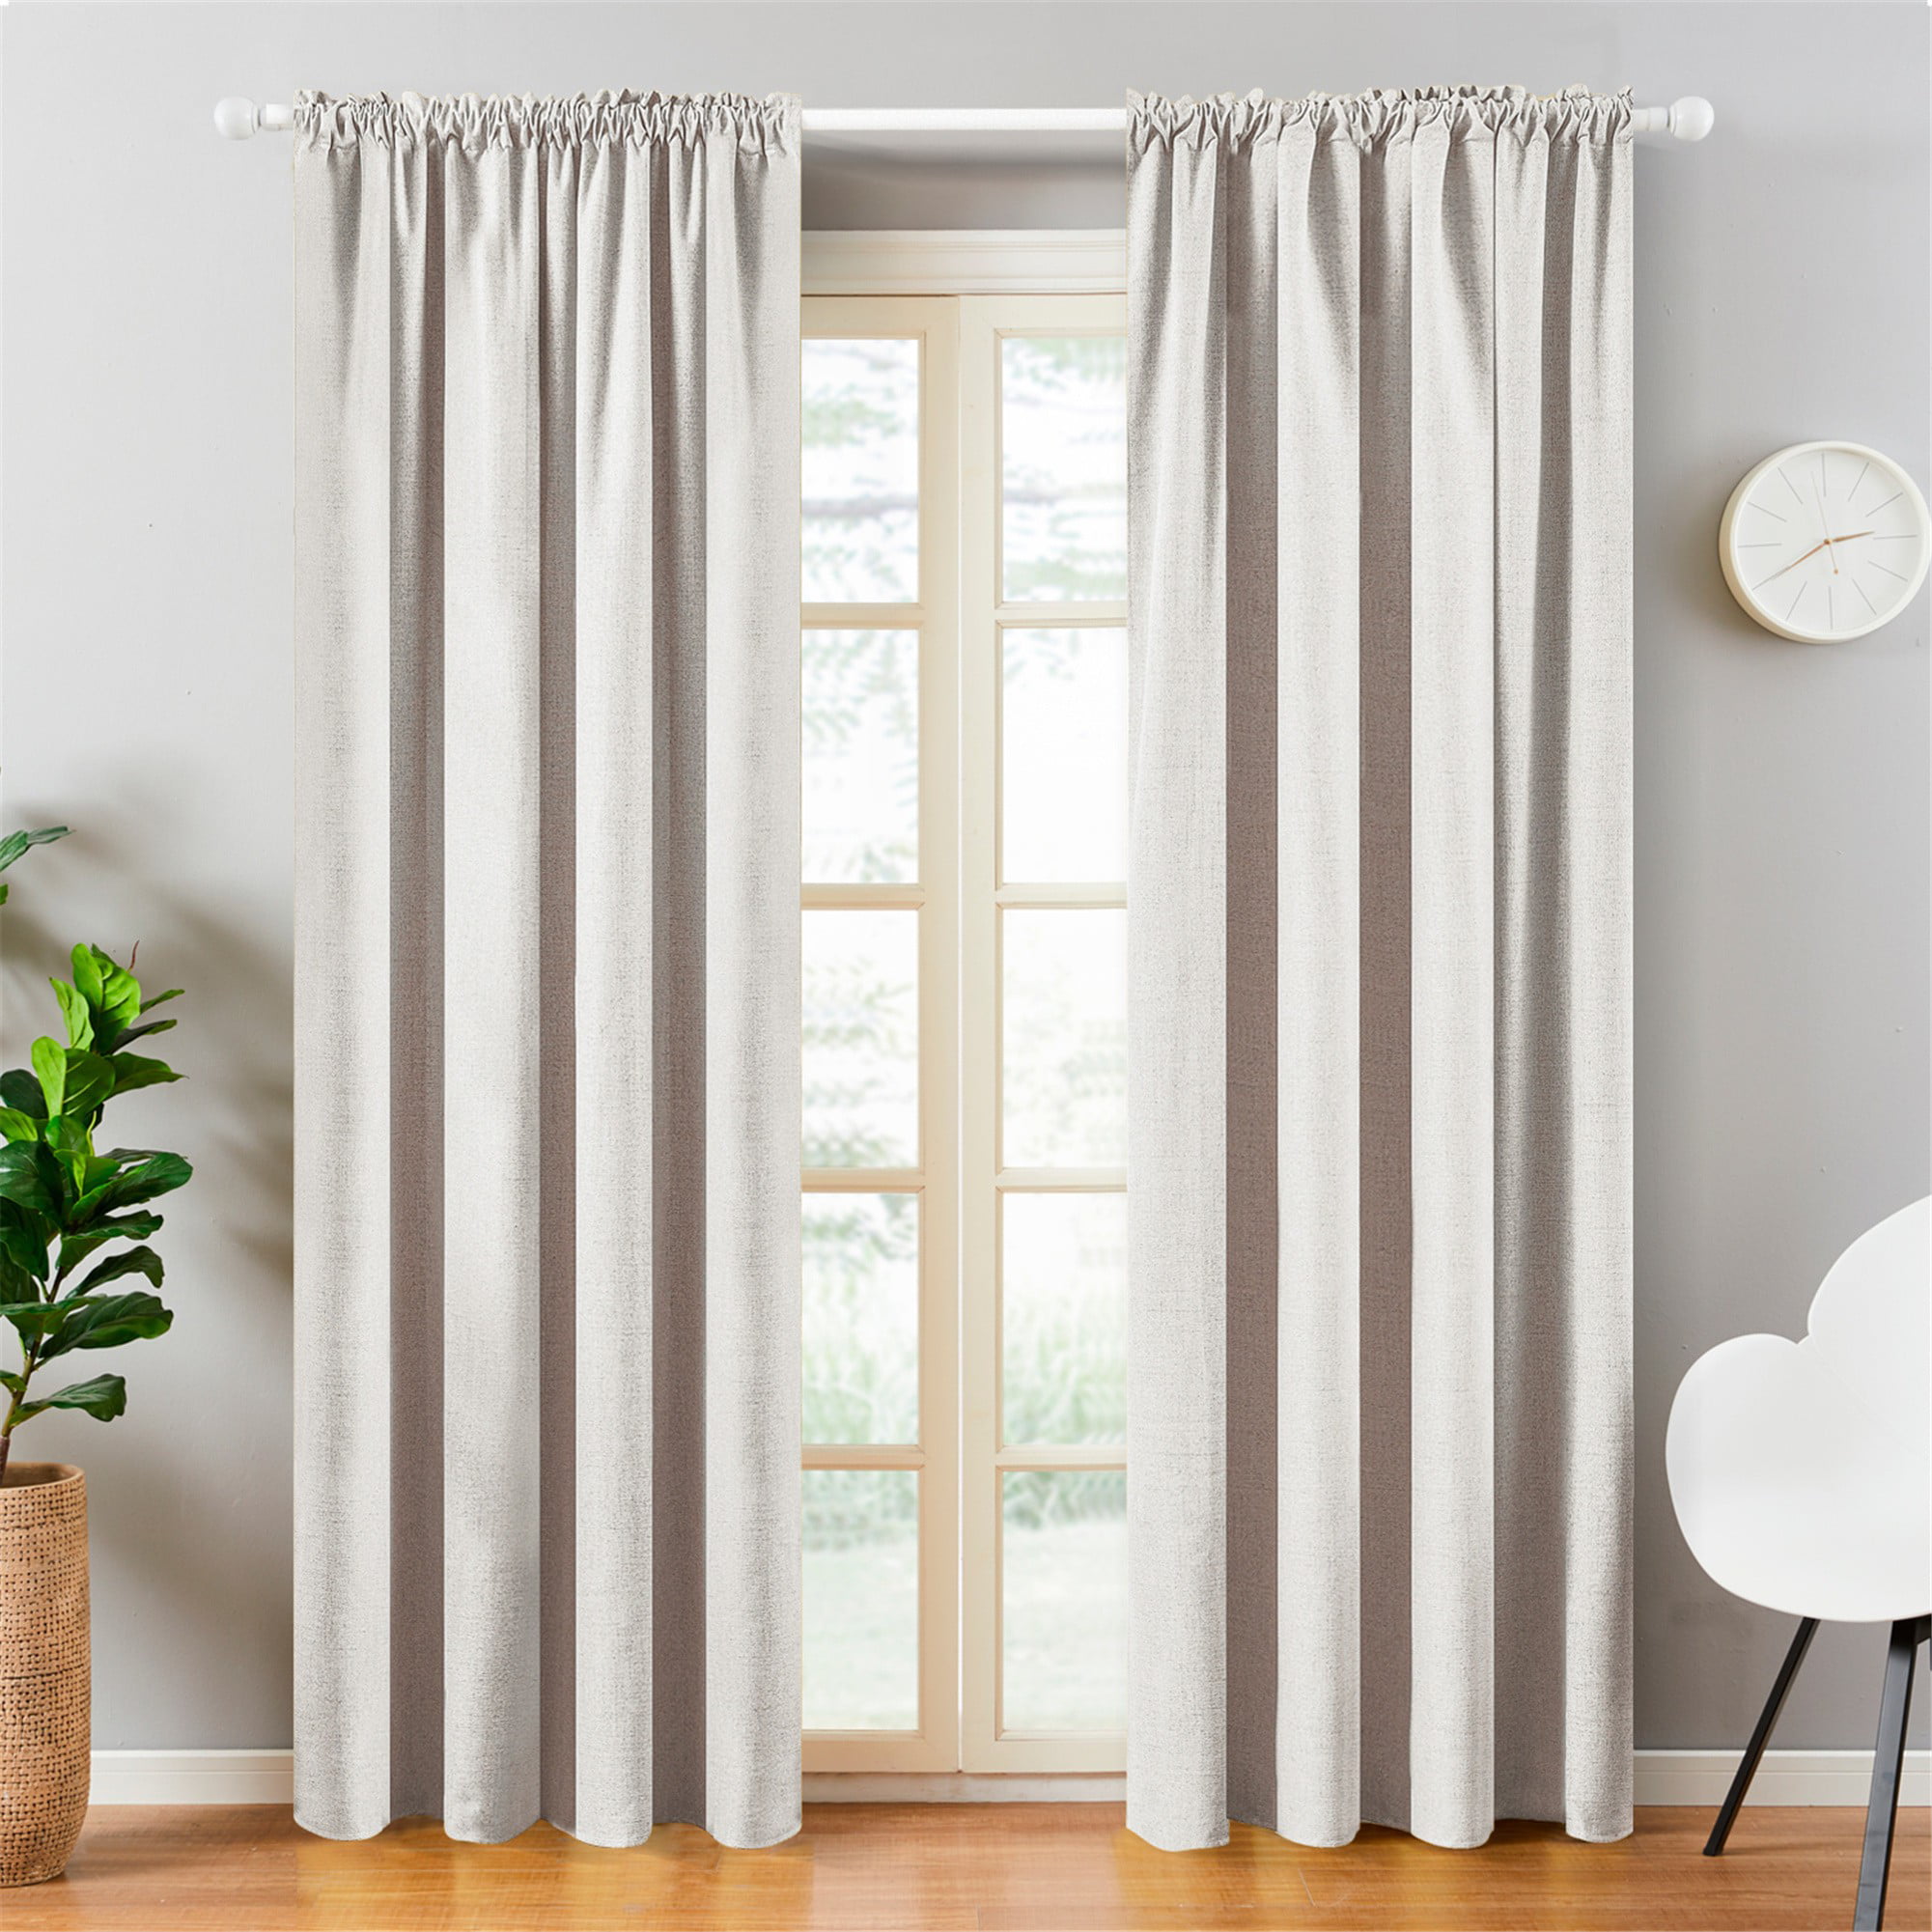 Grey 2 Panels Top Finel Faux Linen 100% Blackout Curtains 63 Inch Length for Bedroom Living Room Thermal Insulated Drapes Room Darkening Rod Pocket Window Curtains 